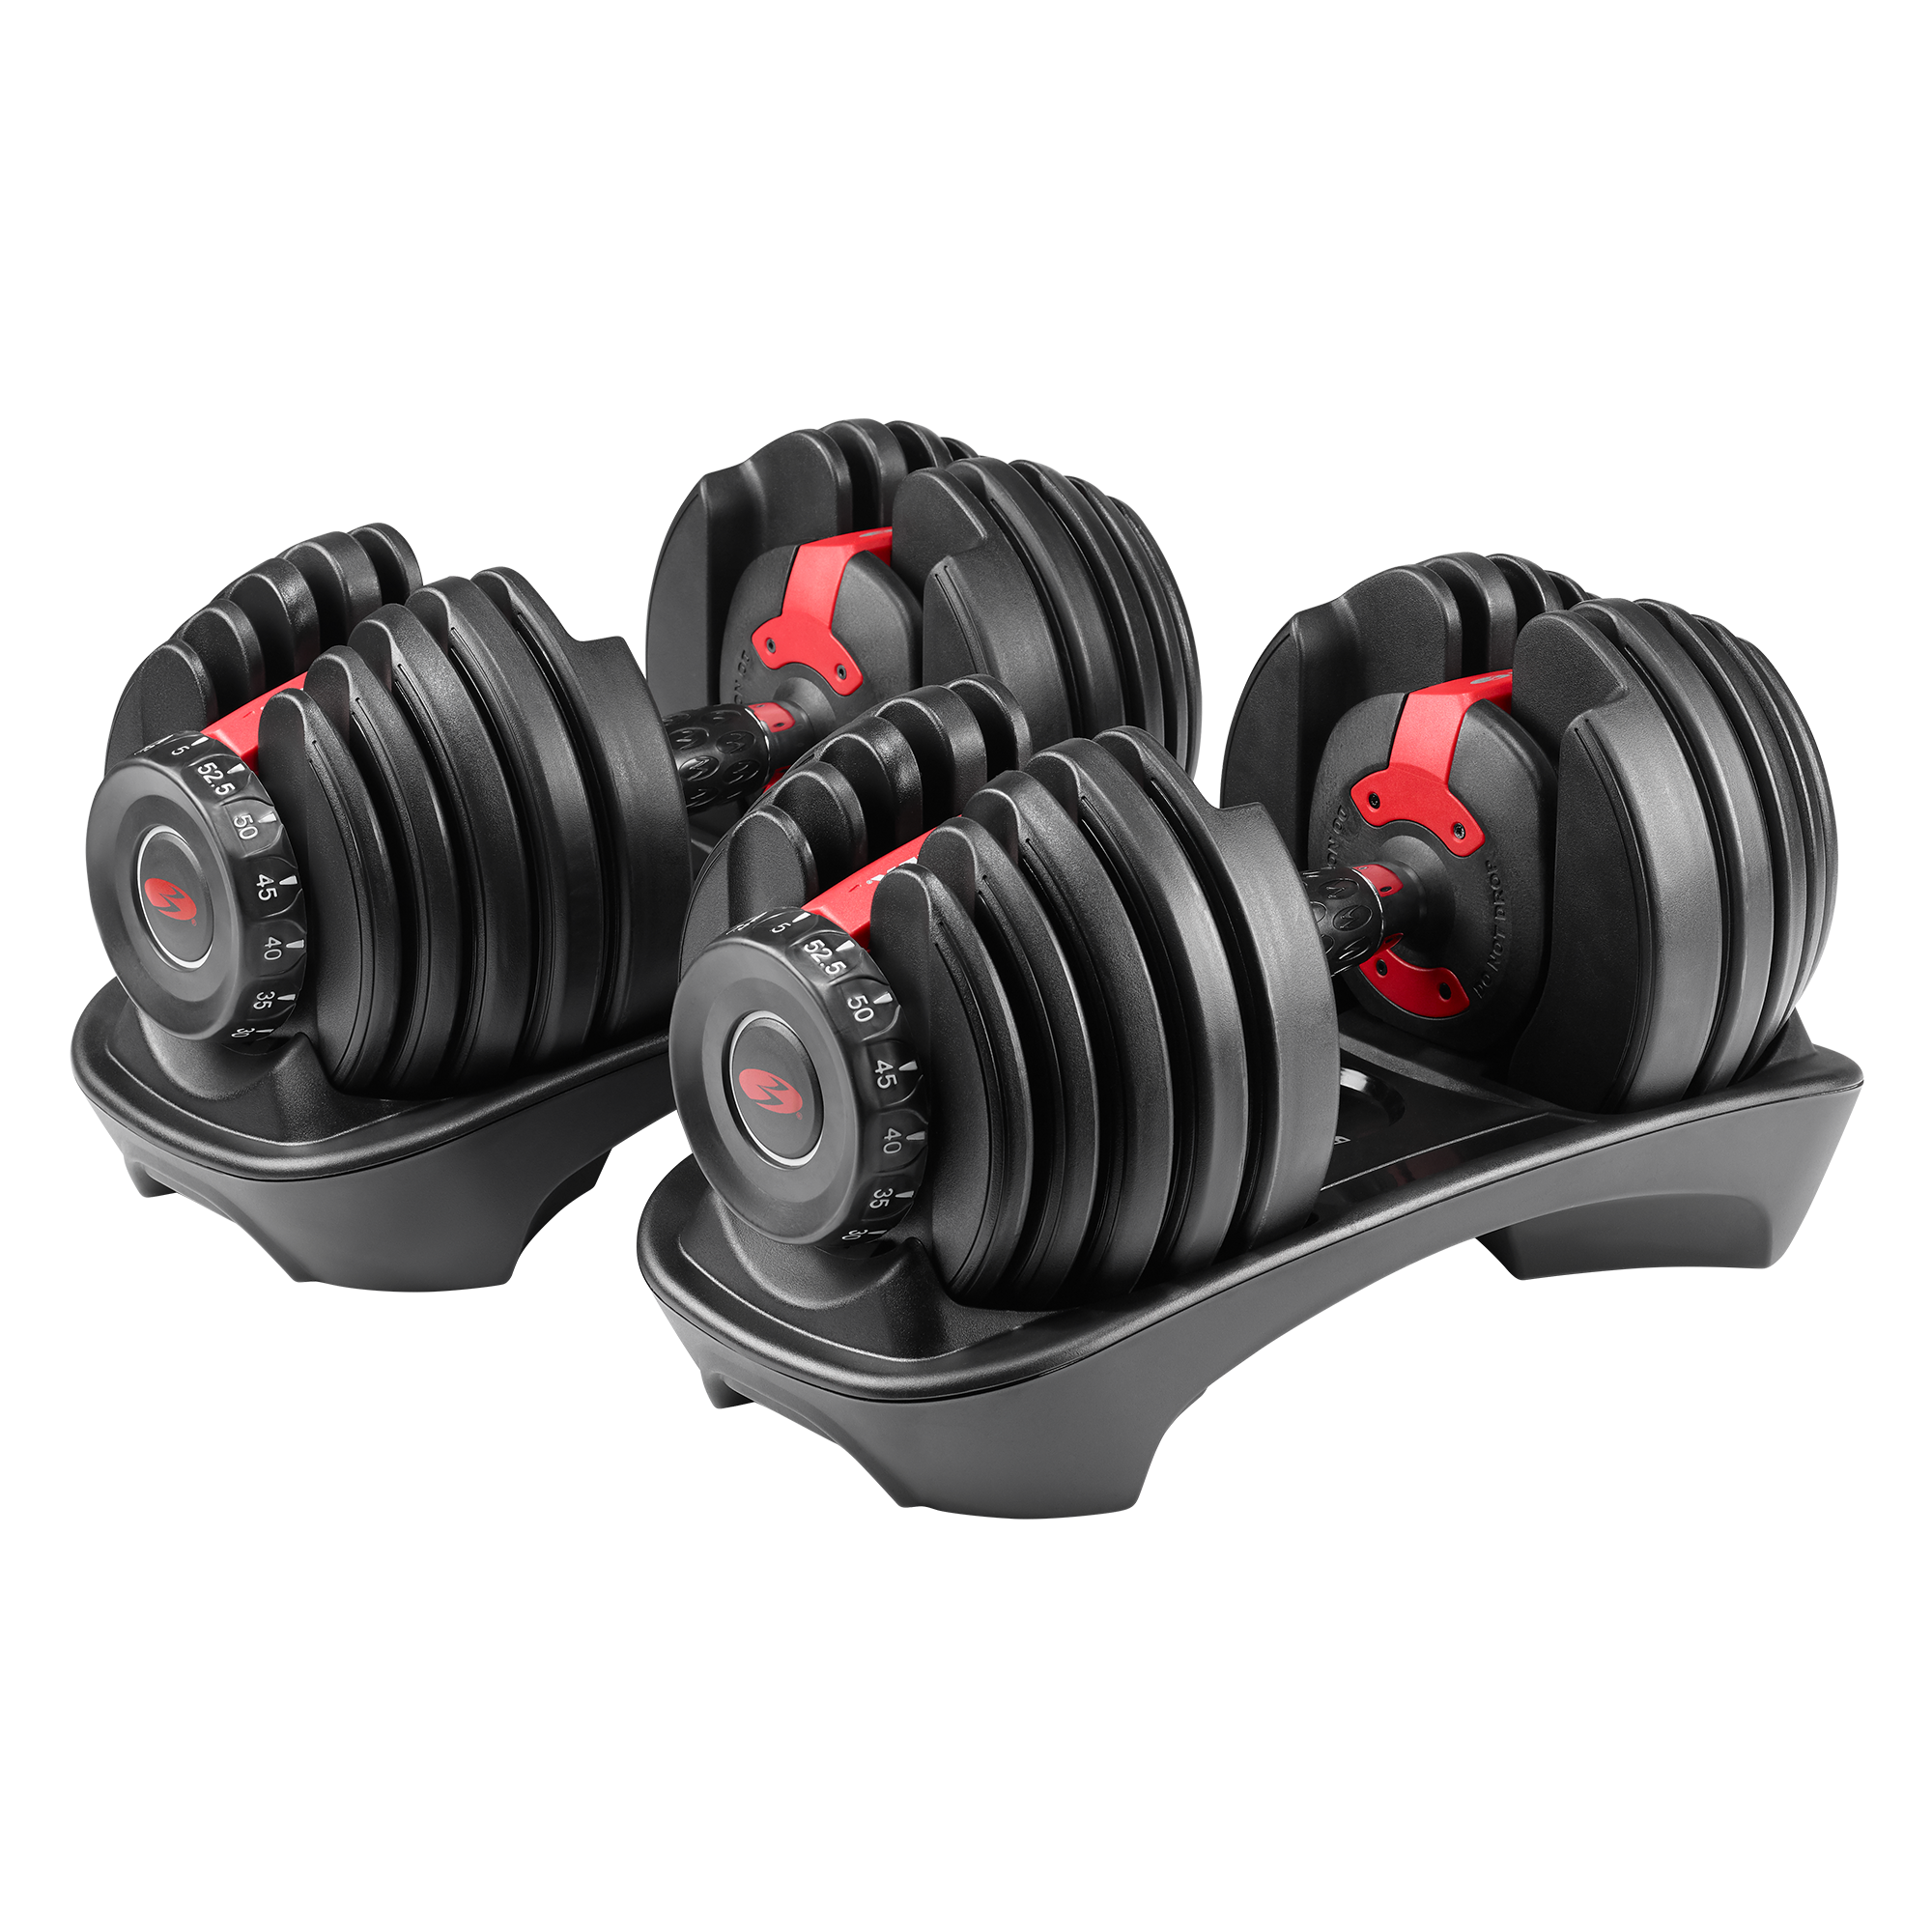 Bowflex SelectTech 552 Adjustable Dumbbells New Free Same Day Shipping Pair 